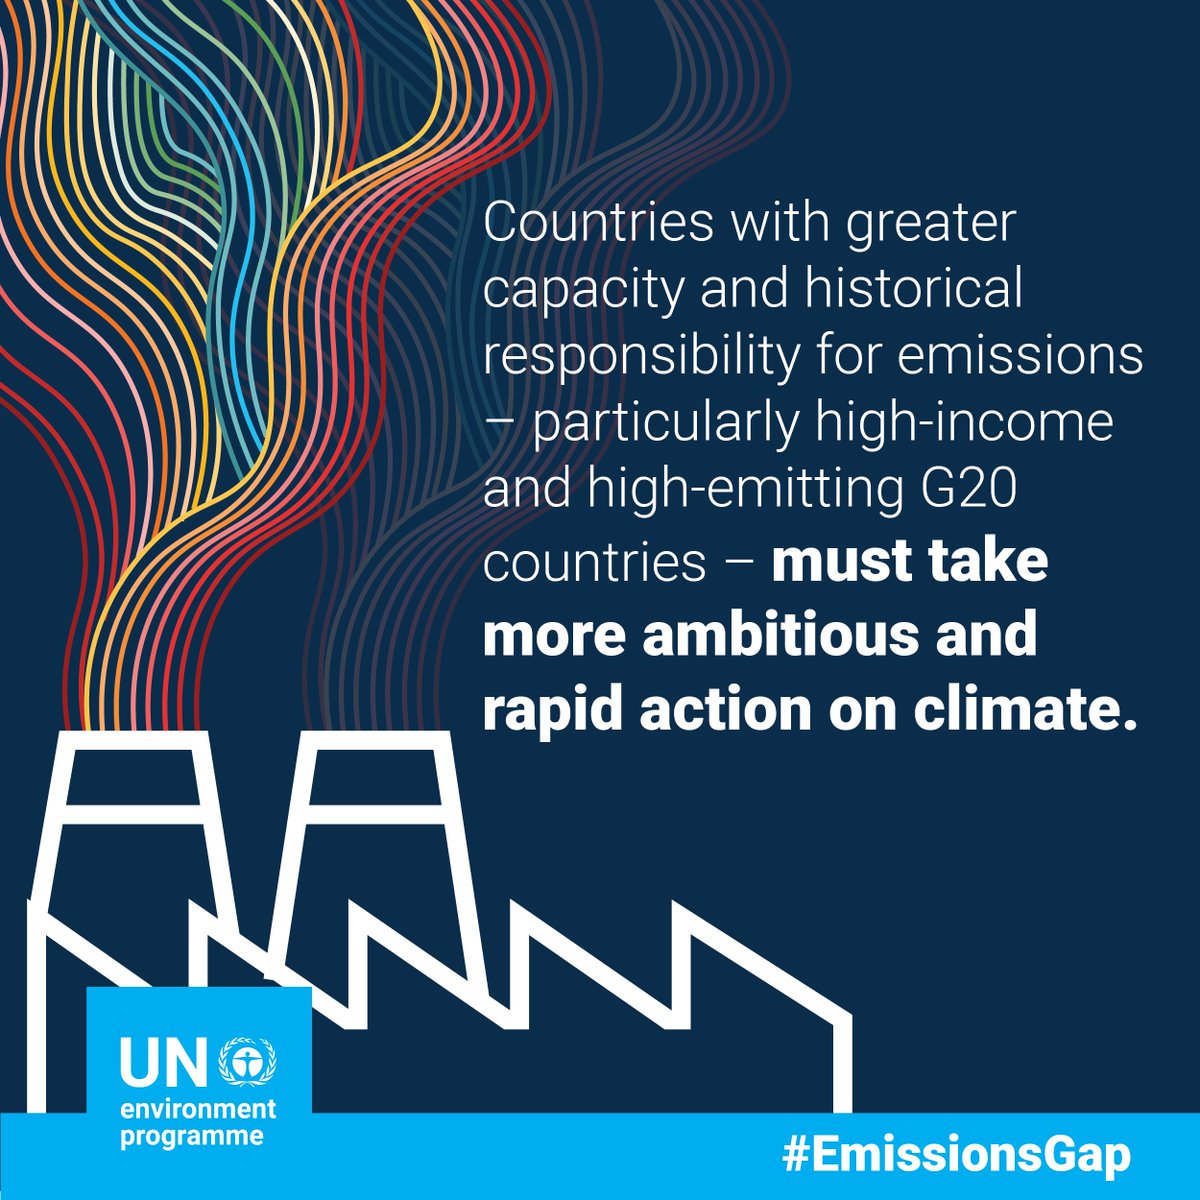 High-income and high-emitting countries must take more ambitious action to support developing nations’ shift to a low-carbon future, including providing financial and technical support.

Full insights from UNEP's #EmissionsGap Report ahead of #COP28: unep.org/resources/emis…